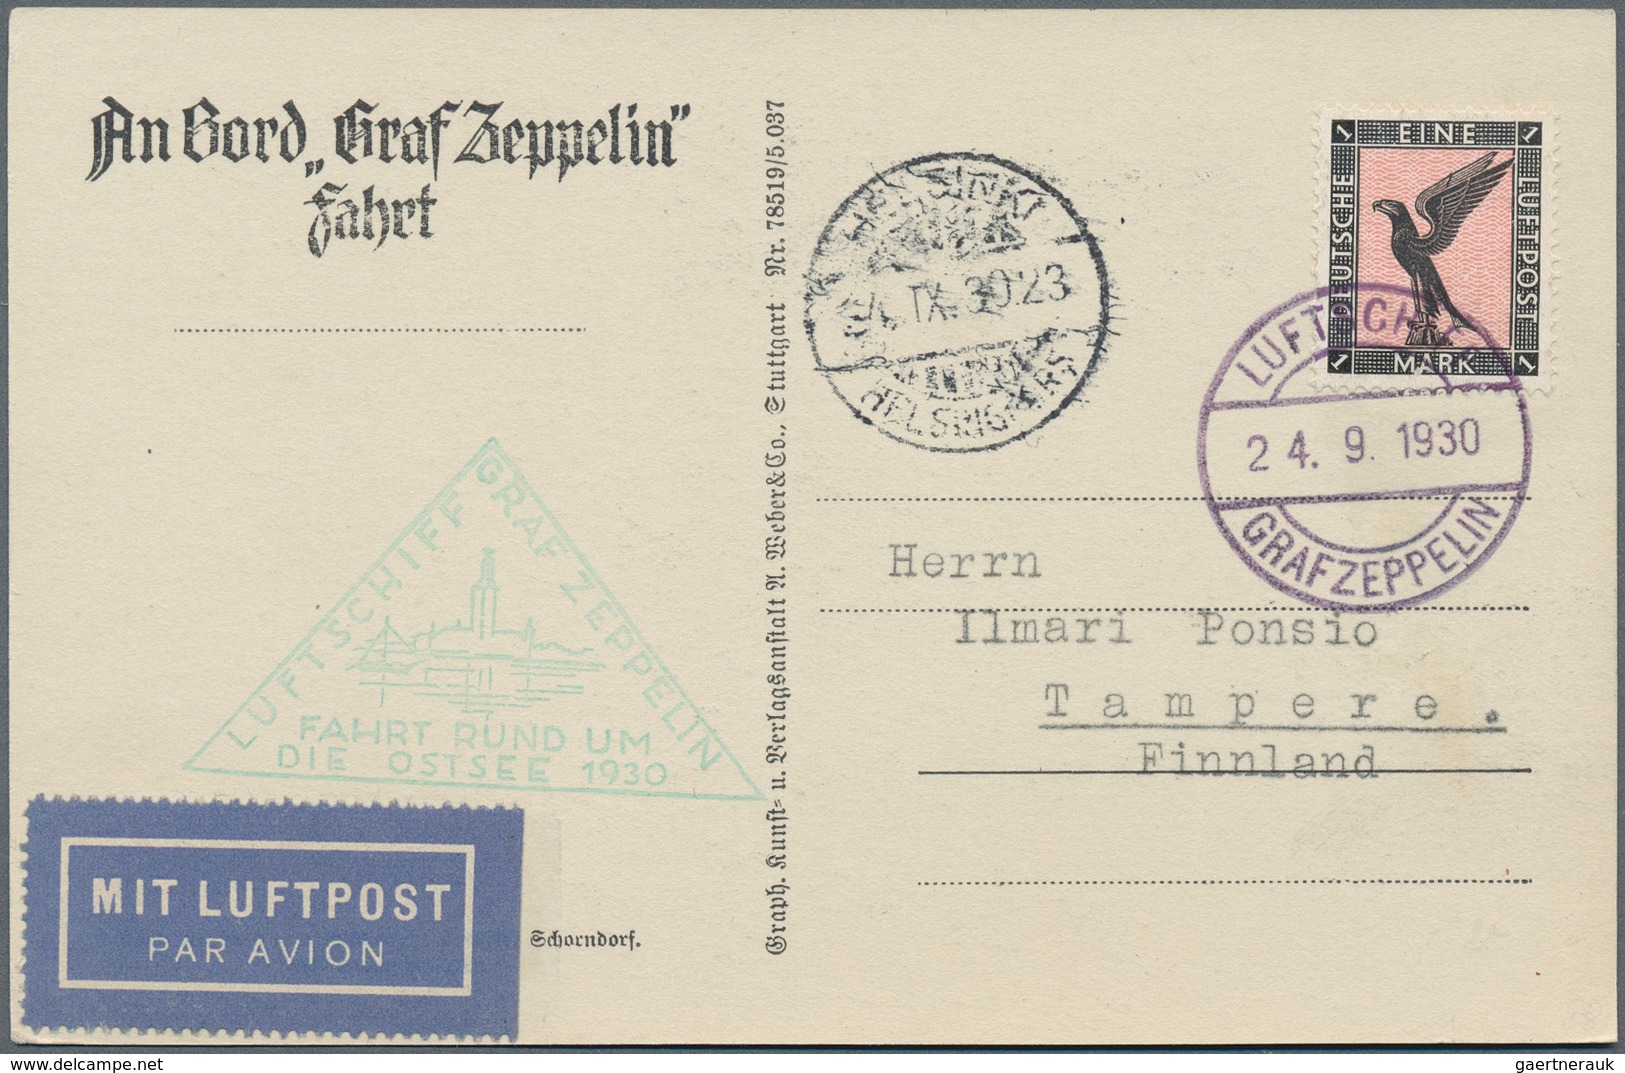 Flugpost Deutschland: Over 140 Zeppelin postcards, mostly Real Photos with the largest part pioneer